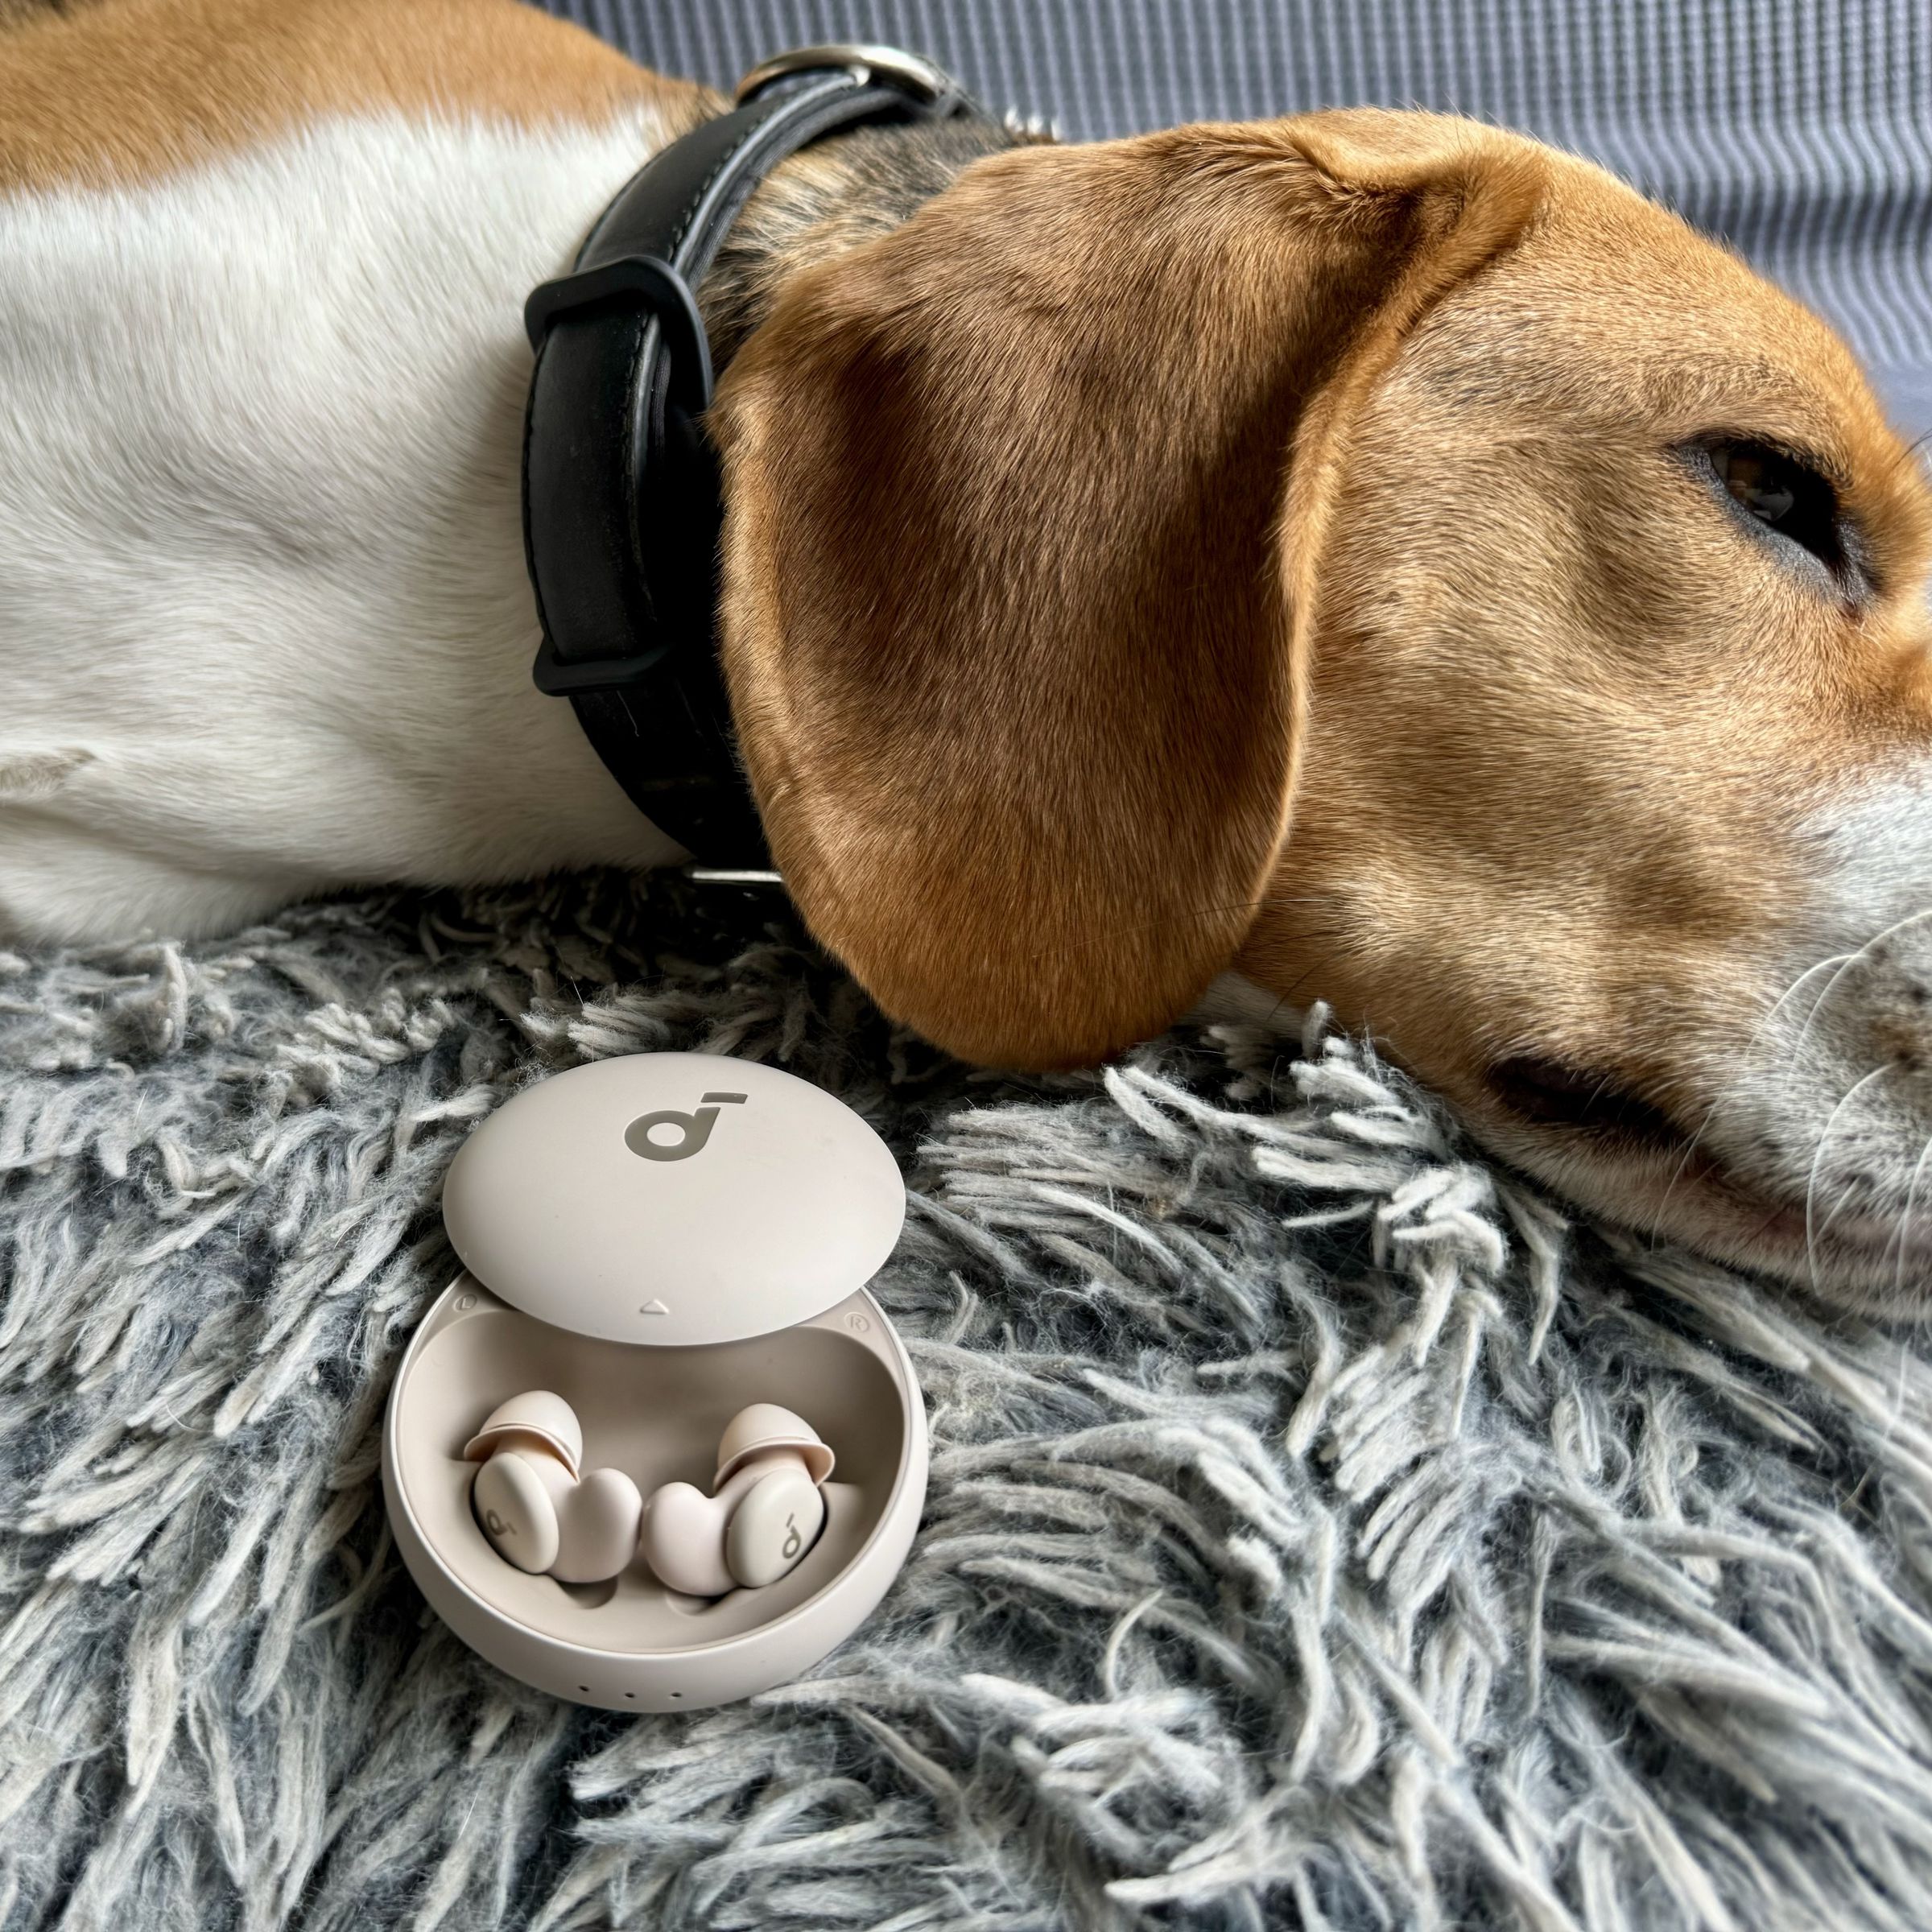 A beagle lies on his plush sleep mat with the Soundcore Sleep A20 earbuds shown in their case in the foreground.